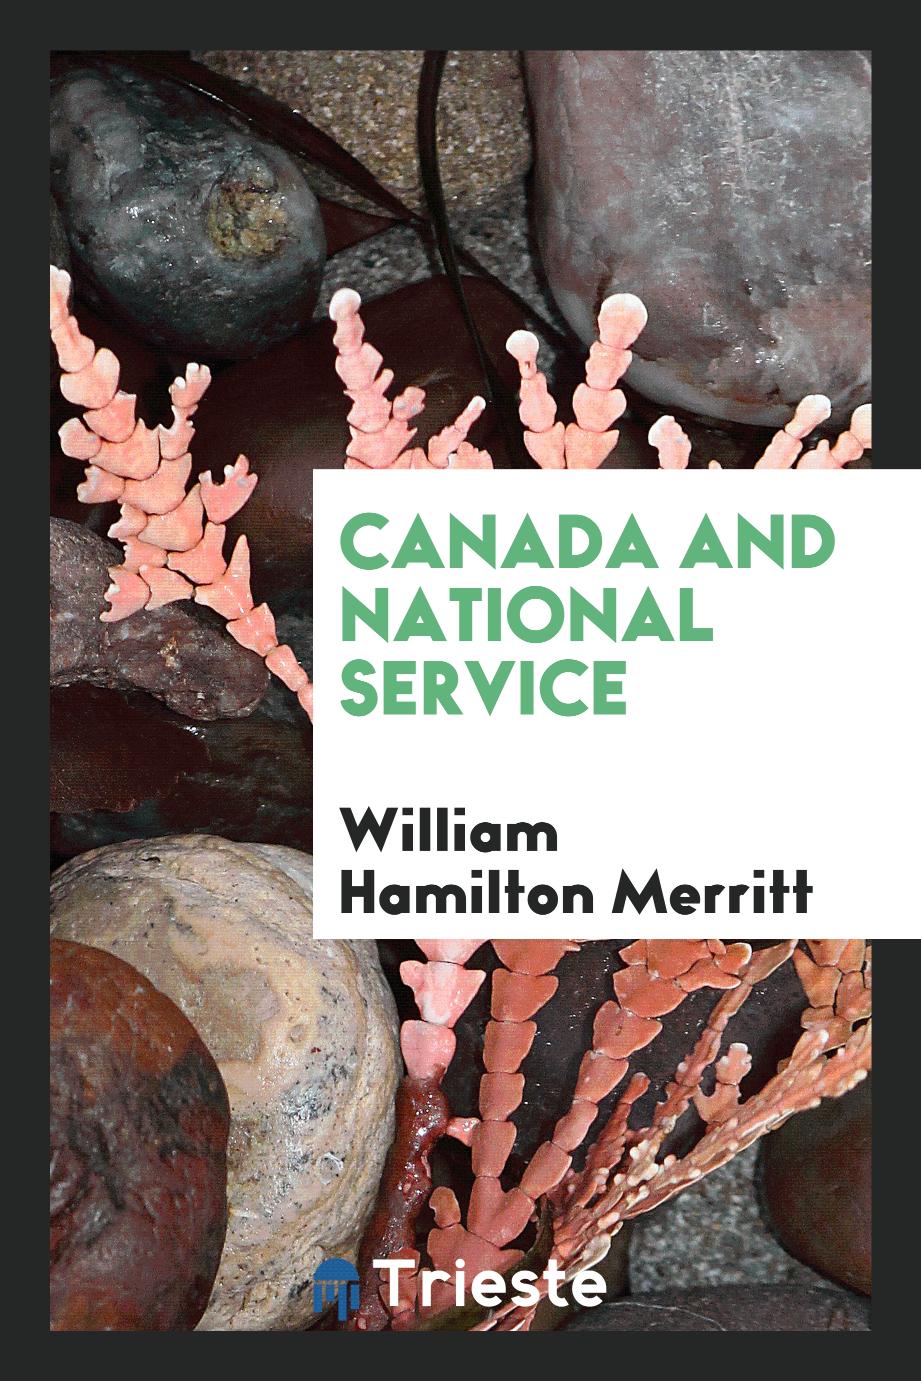 Canada and national service